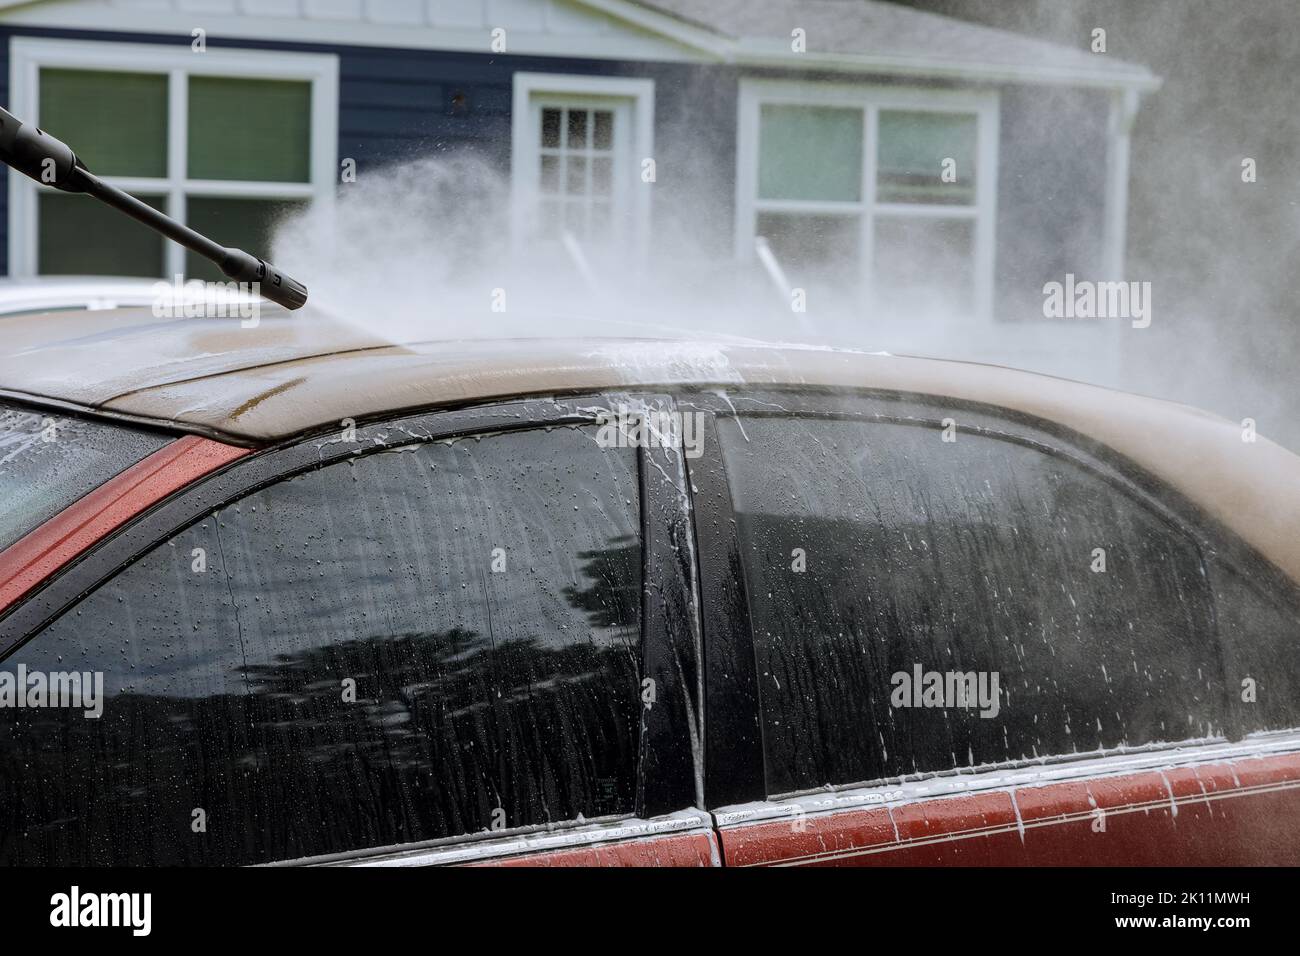 A man is washing a car under a high pressure jet spraying water with a cleaning agent Stock Photo